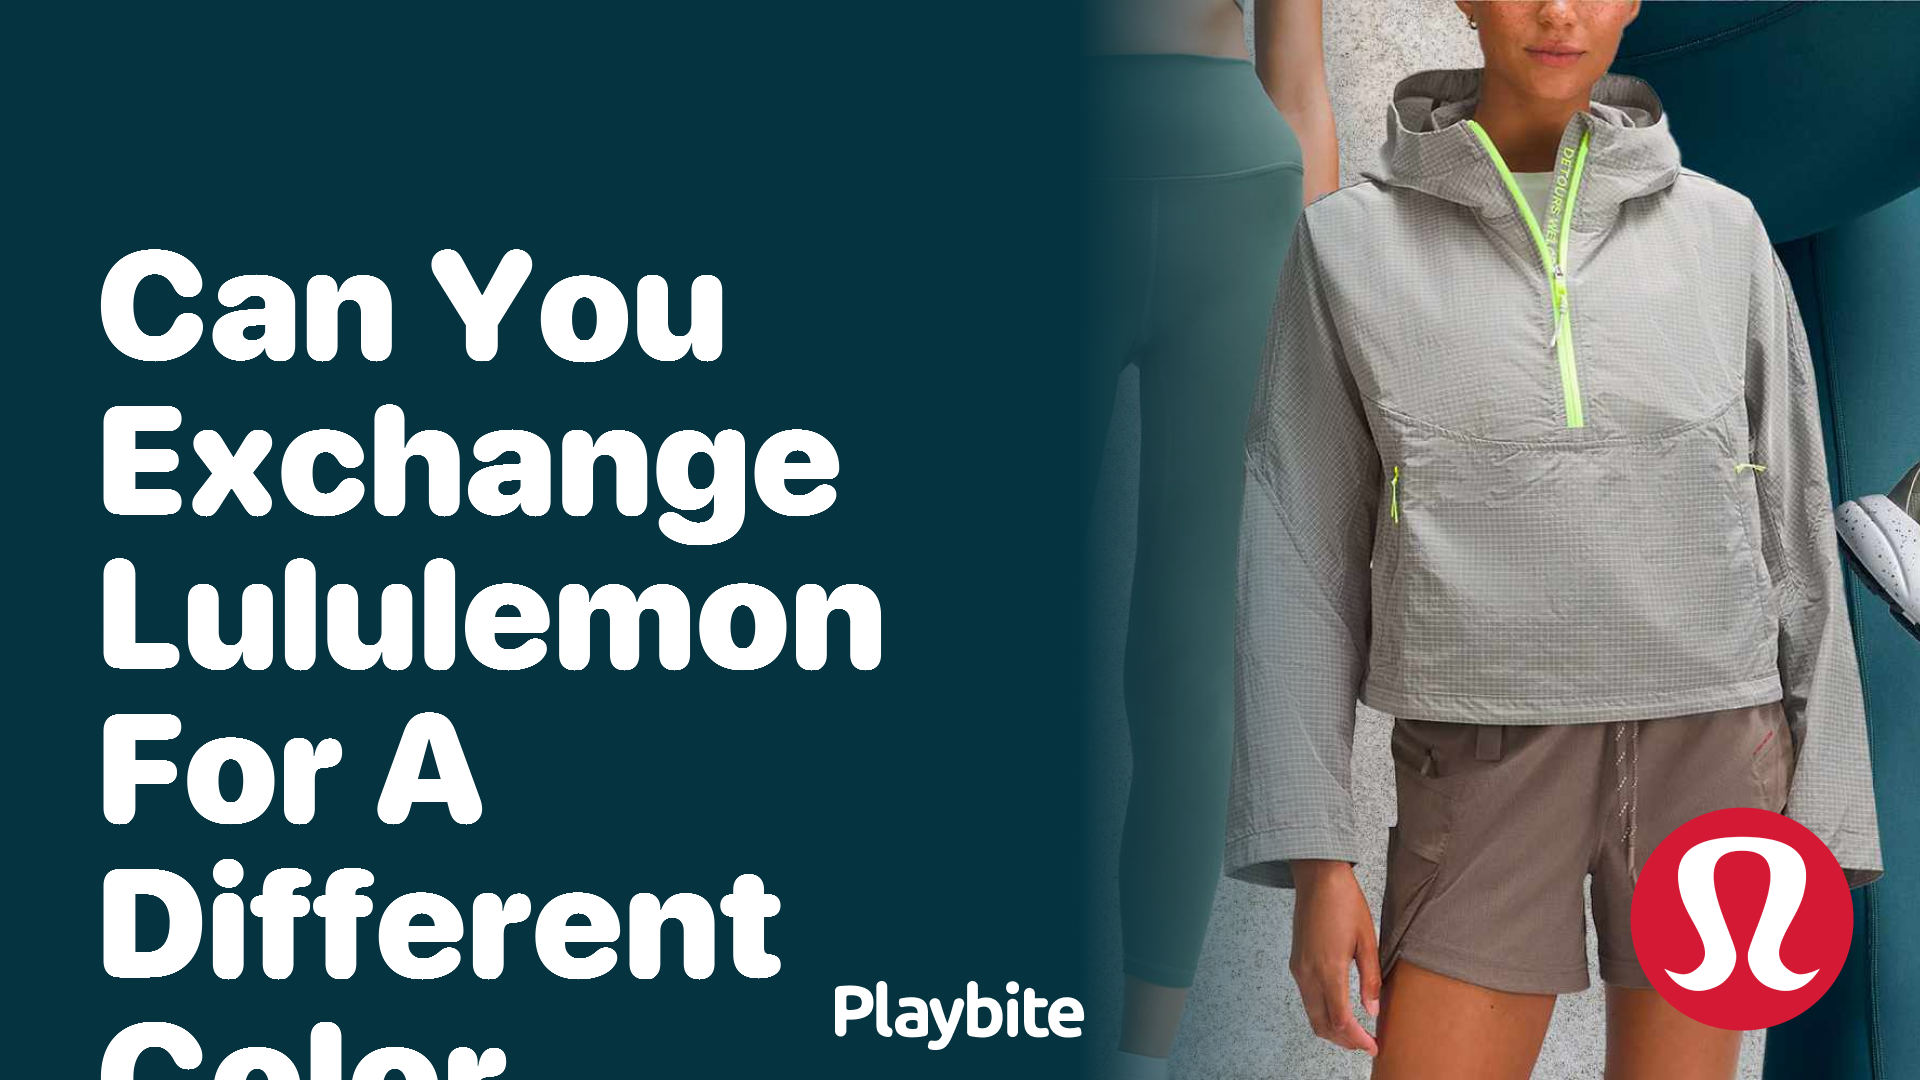 https://www.playbite.com/wp-content/uploads/sites/3/2024/03/can-you-exchange-lululemon-for-a-different-color.png